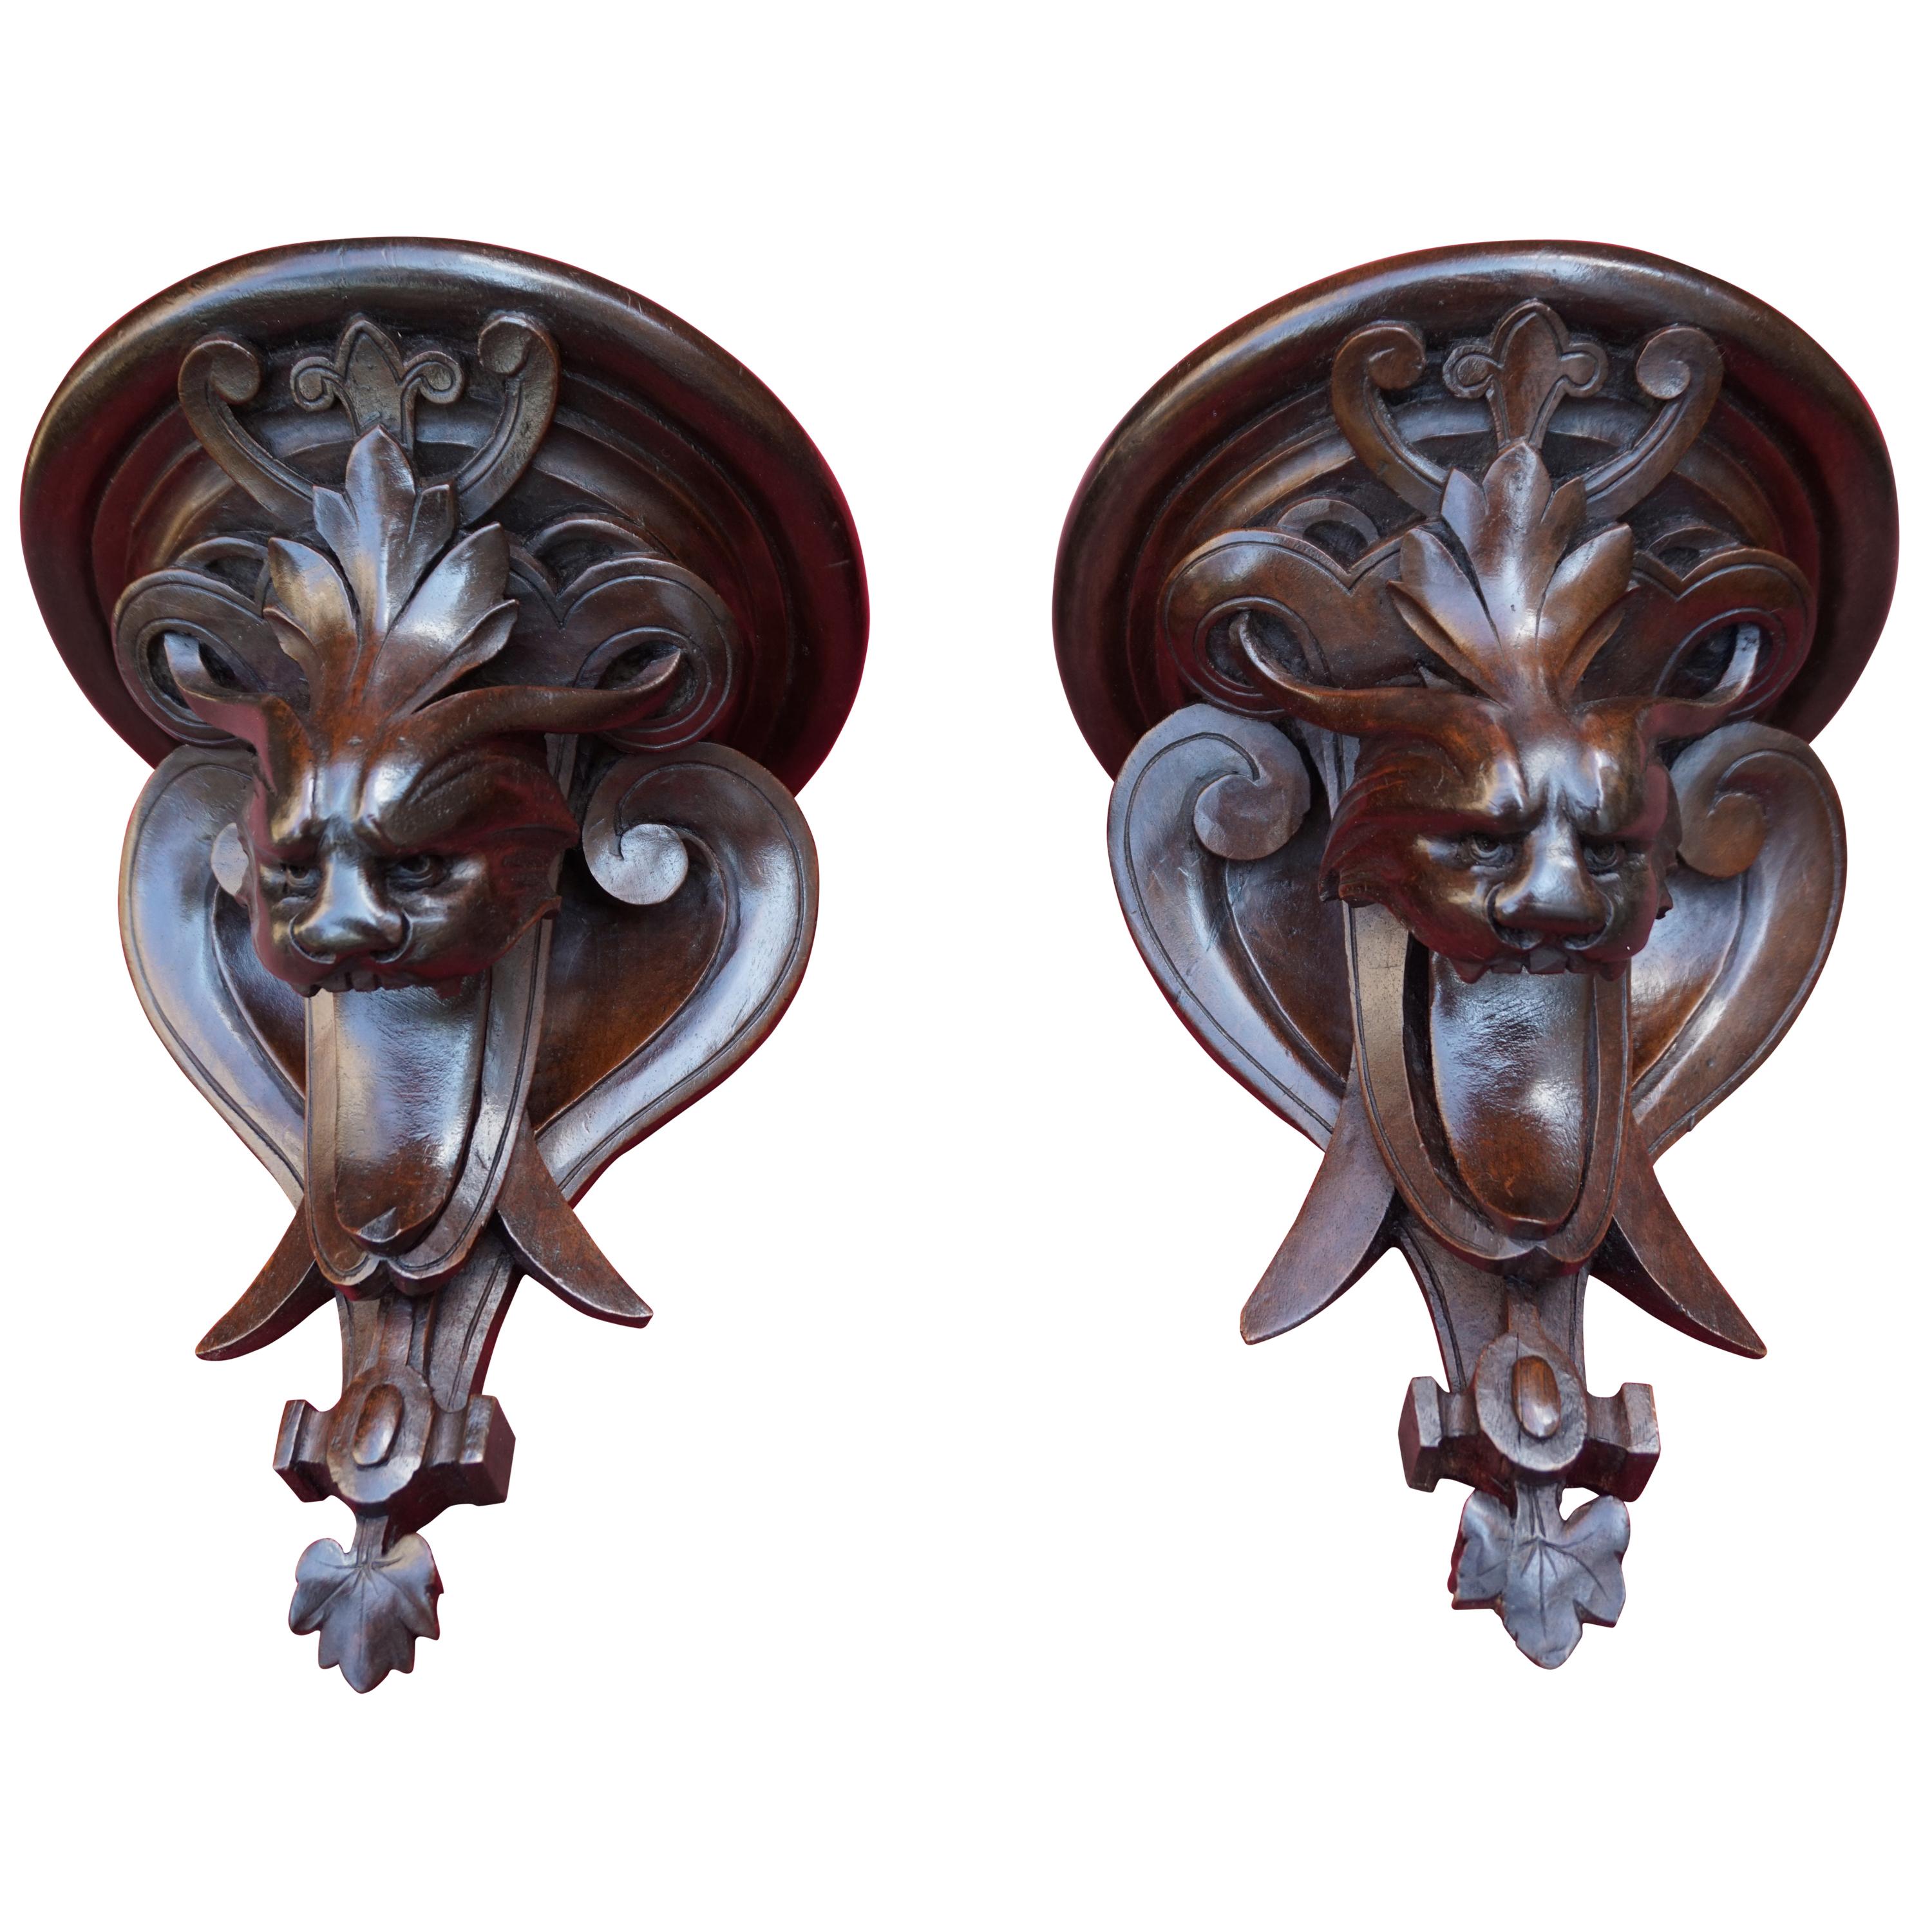 Rare and Antique Pair of Hand Carved Renaissance Revival Grotesque Wall Brackets For Sale